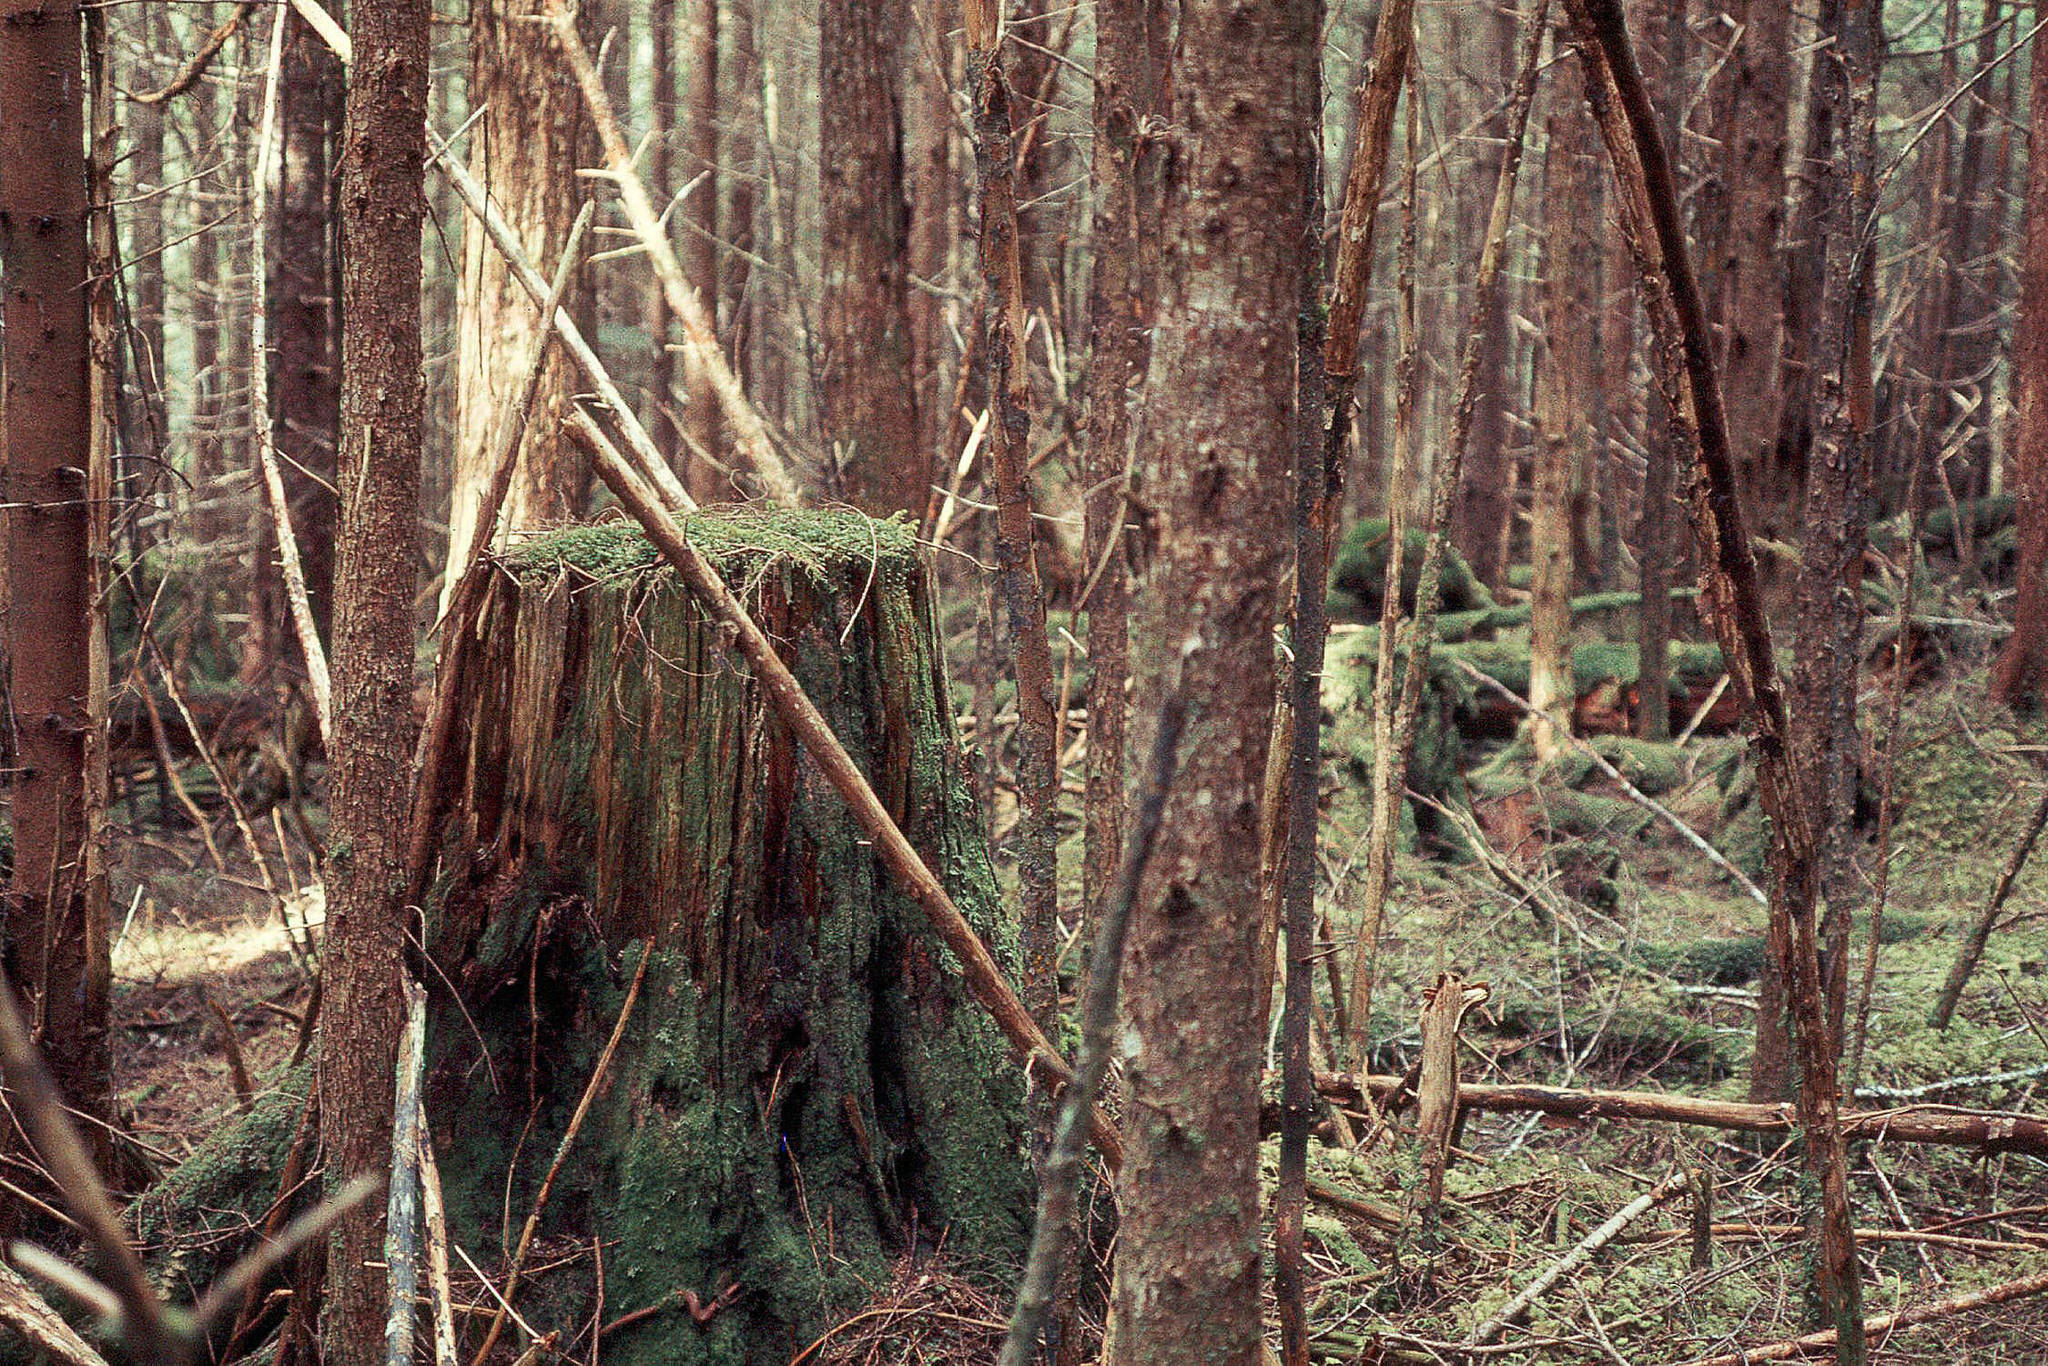 A 60-year-old second growth forest stand on Admiralty Island. John Schoen measured deer density here in comparison to an adjacent old-growth stand. This is a mixed hemlock-spruce stand in which all the trees are the same age and size. Few forest floor plants occur here because of low light levels. These dark, even-aged stands have low structural diversity and provide relatively poor habitat for most wildlife species. In Southeast, it takes two to three centuries before forests that are clear-cut develop the ecological characteristics of old growth. Note the old-growth stump in the left side of the image. (Photo by John Schoen)